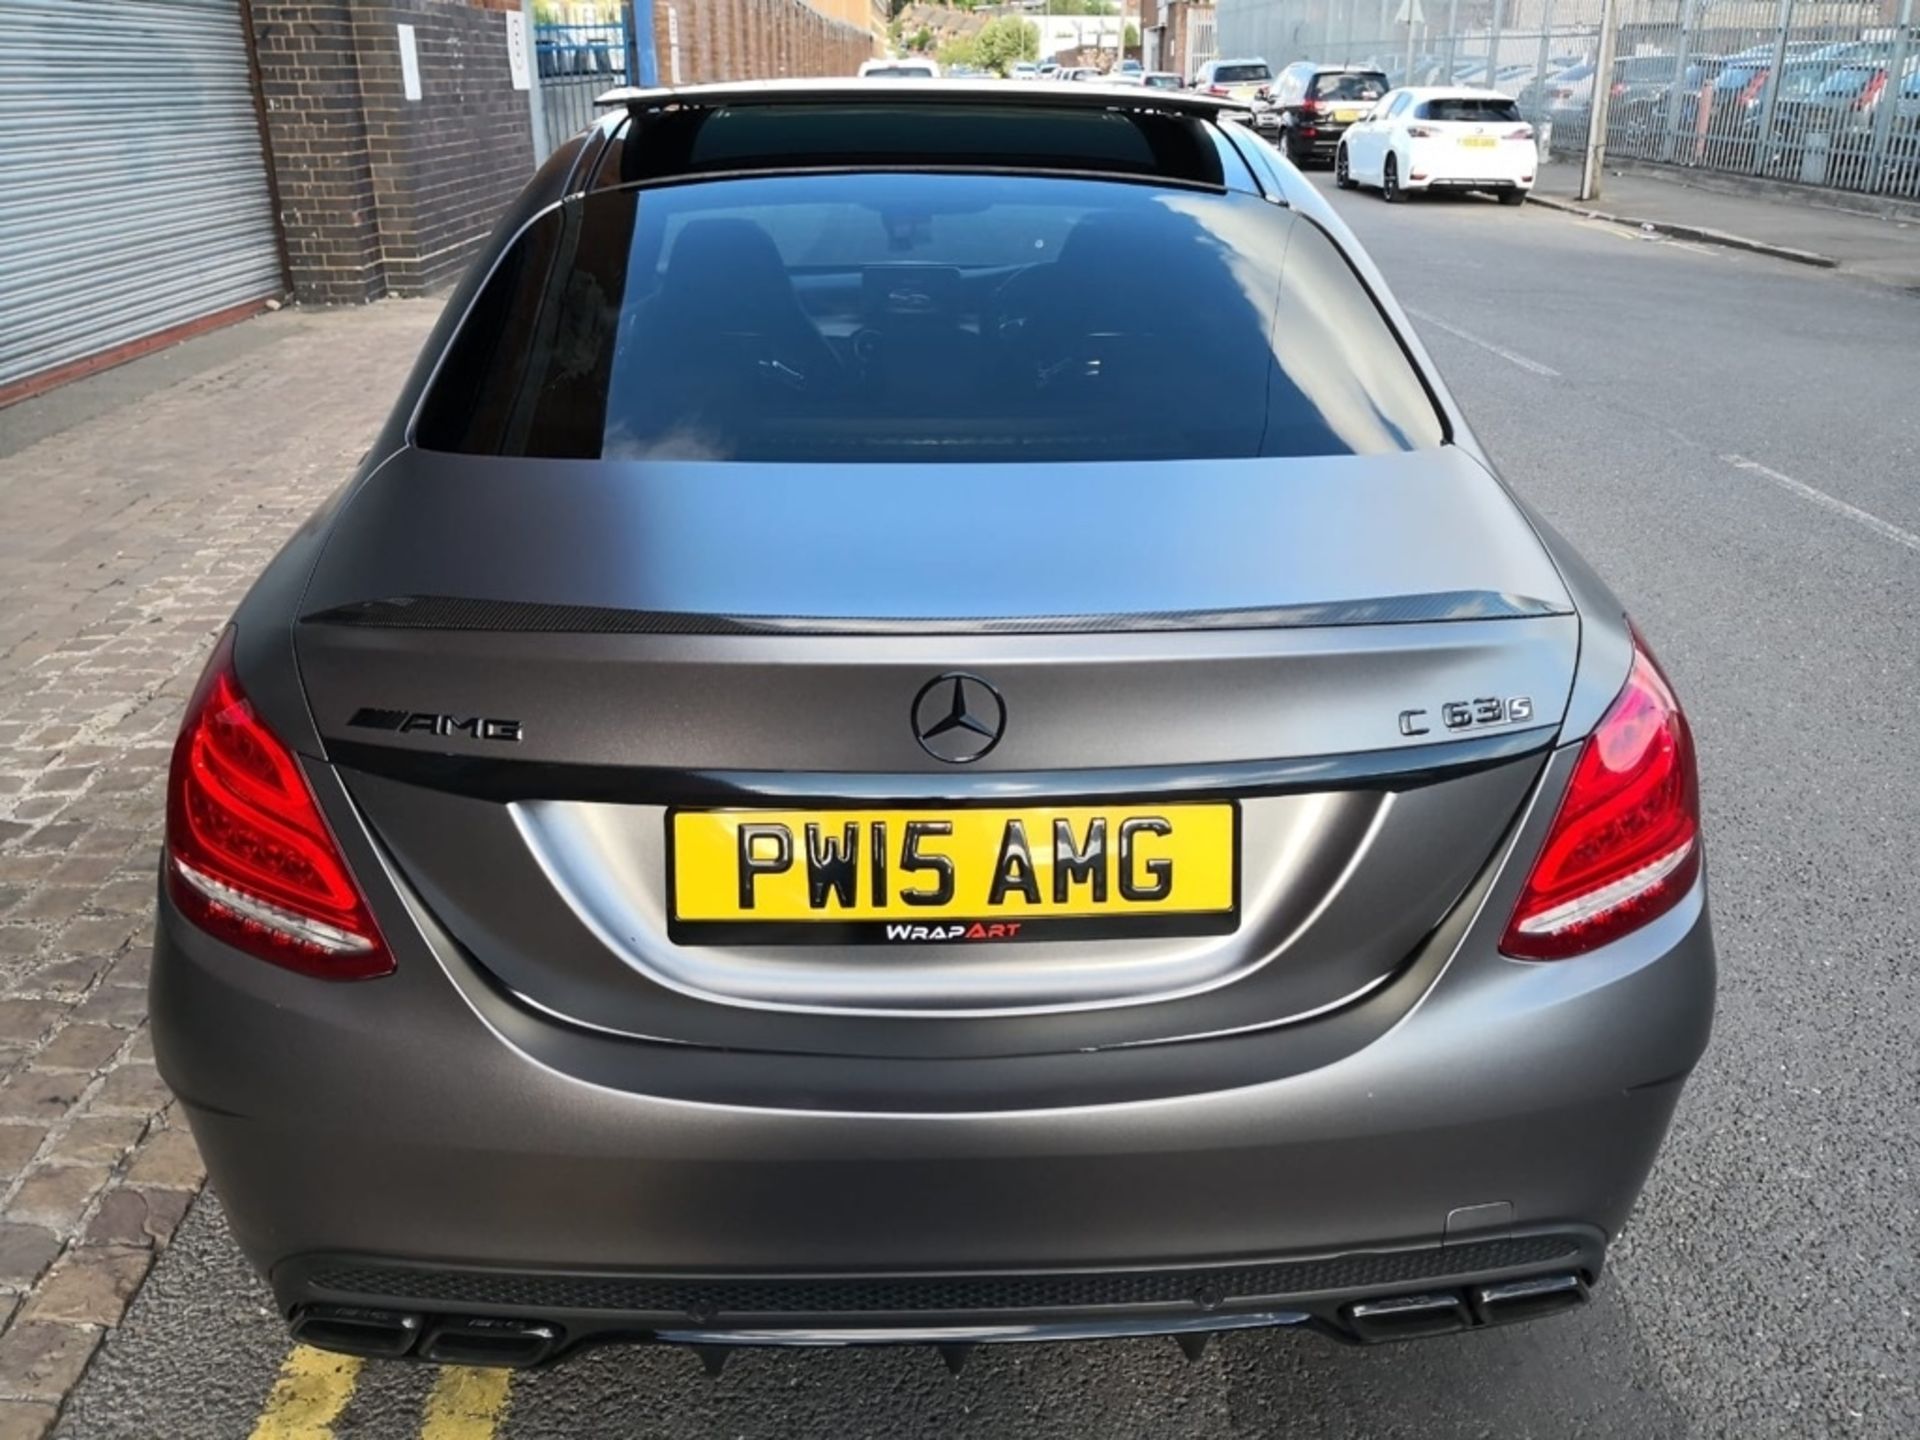 Mercedes-Benz C Class 4.0 C63 AMG S 4 Dr – Automatic – Petrol – WhiteReg: PW15 AMG - 2015Mileage: - Image 3 of 8